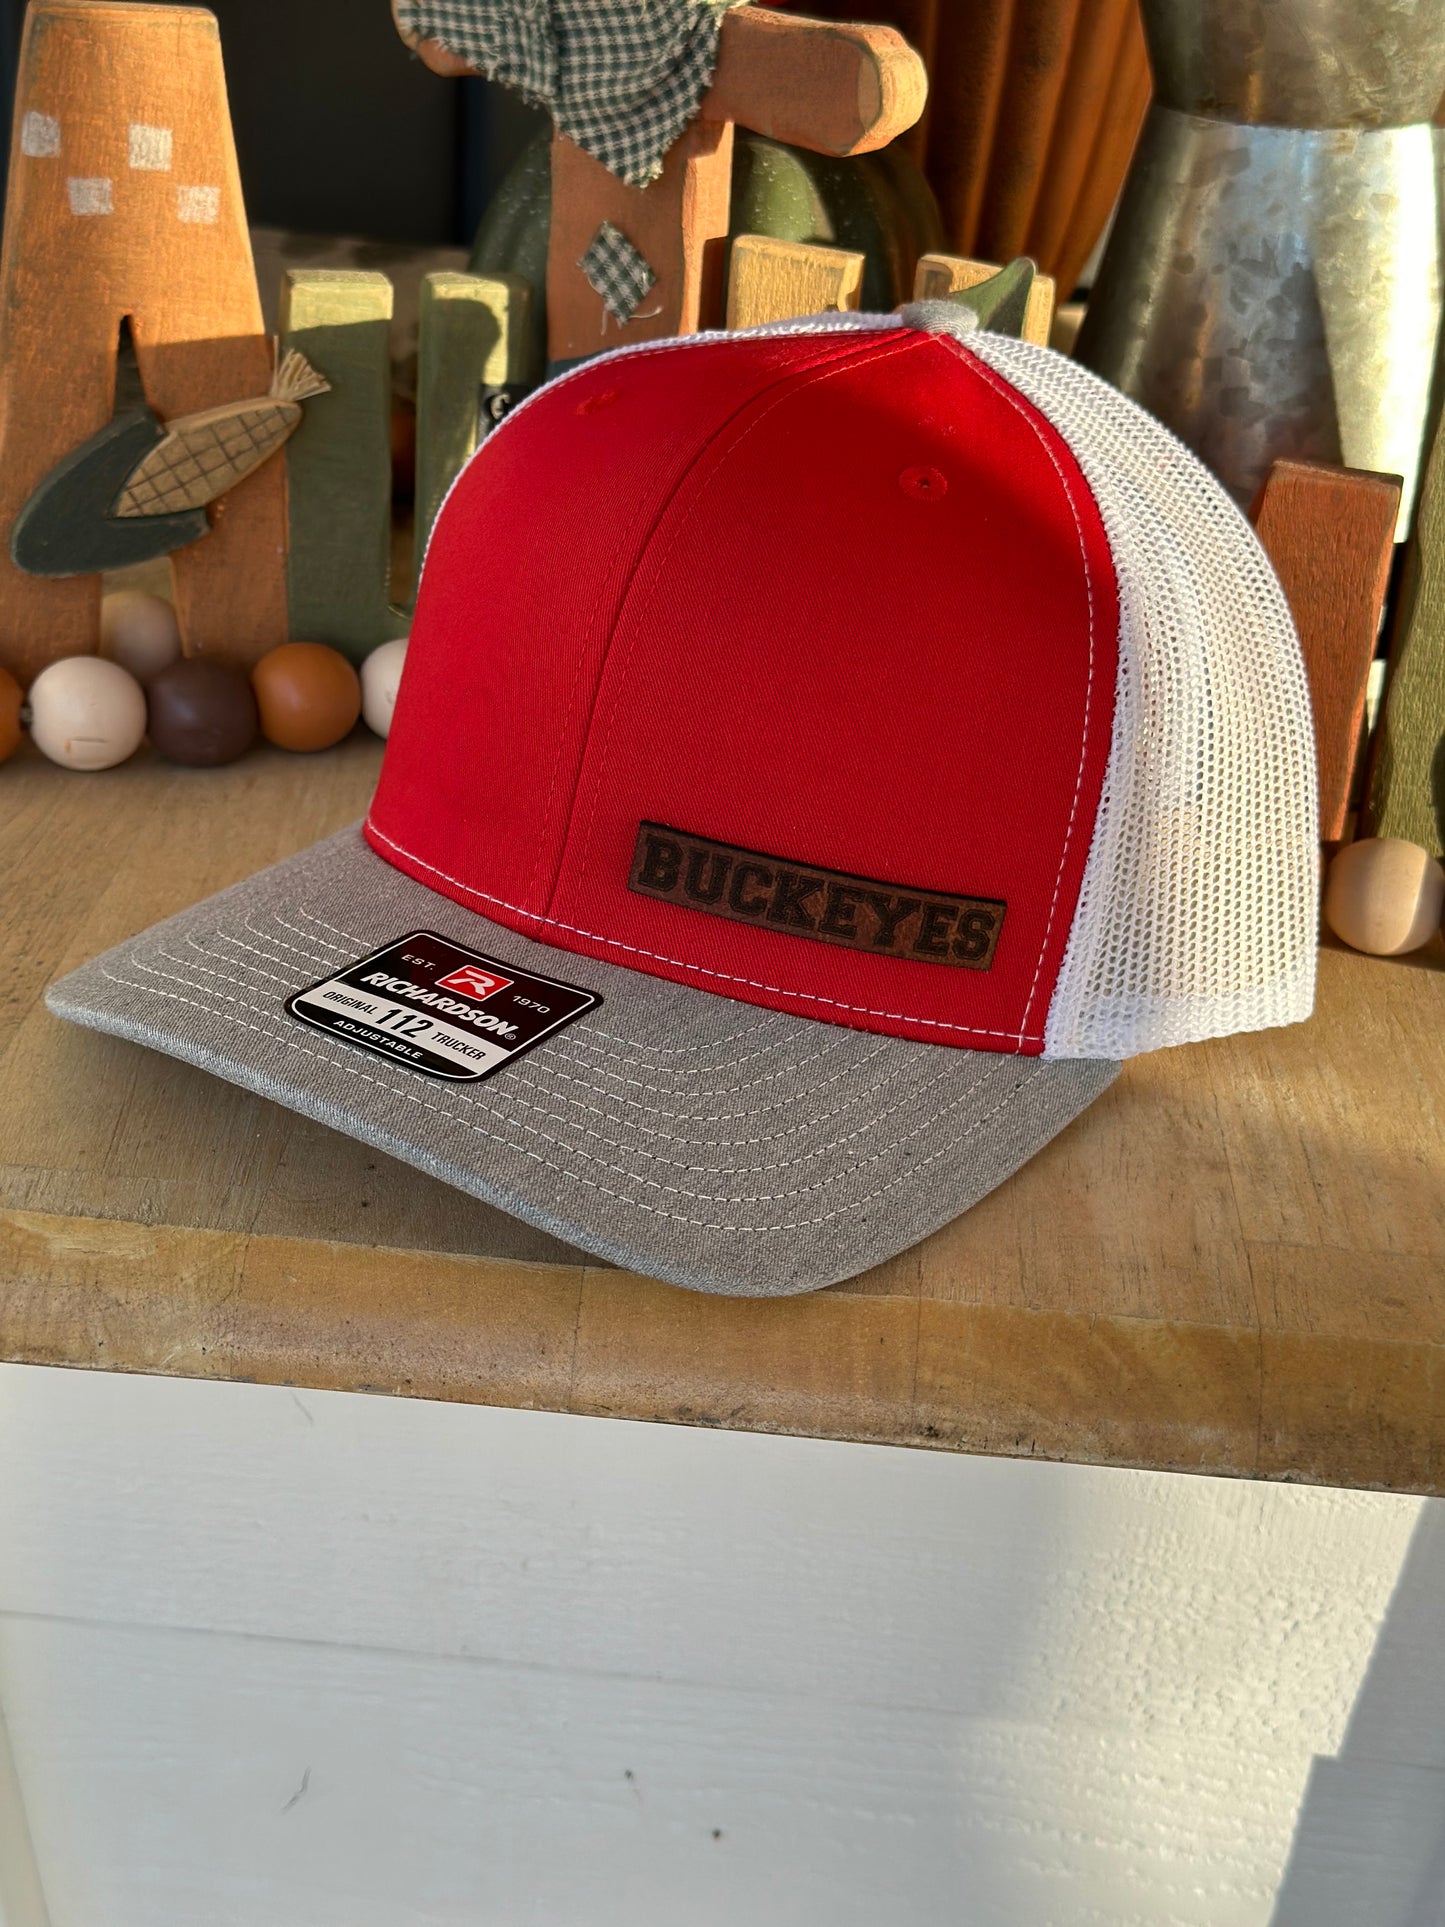 Ohio BUCKEYES Leather Patch Cap, Scarlet and Gray, Richardson 112, Richardson Hat, Ohio Hat, Ohio Dad Hat, Cap, Leather Richardson Hat 112,